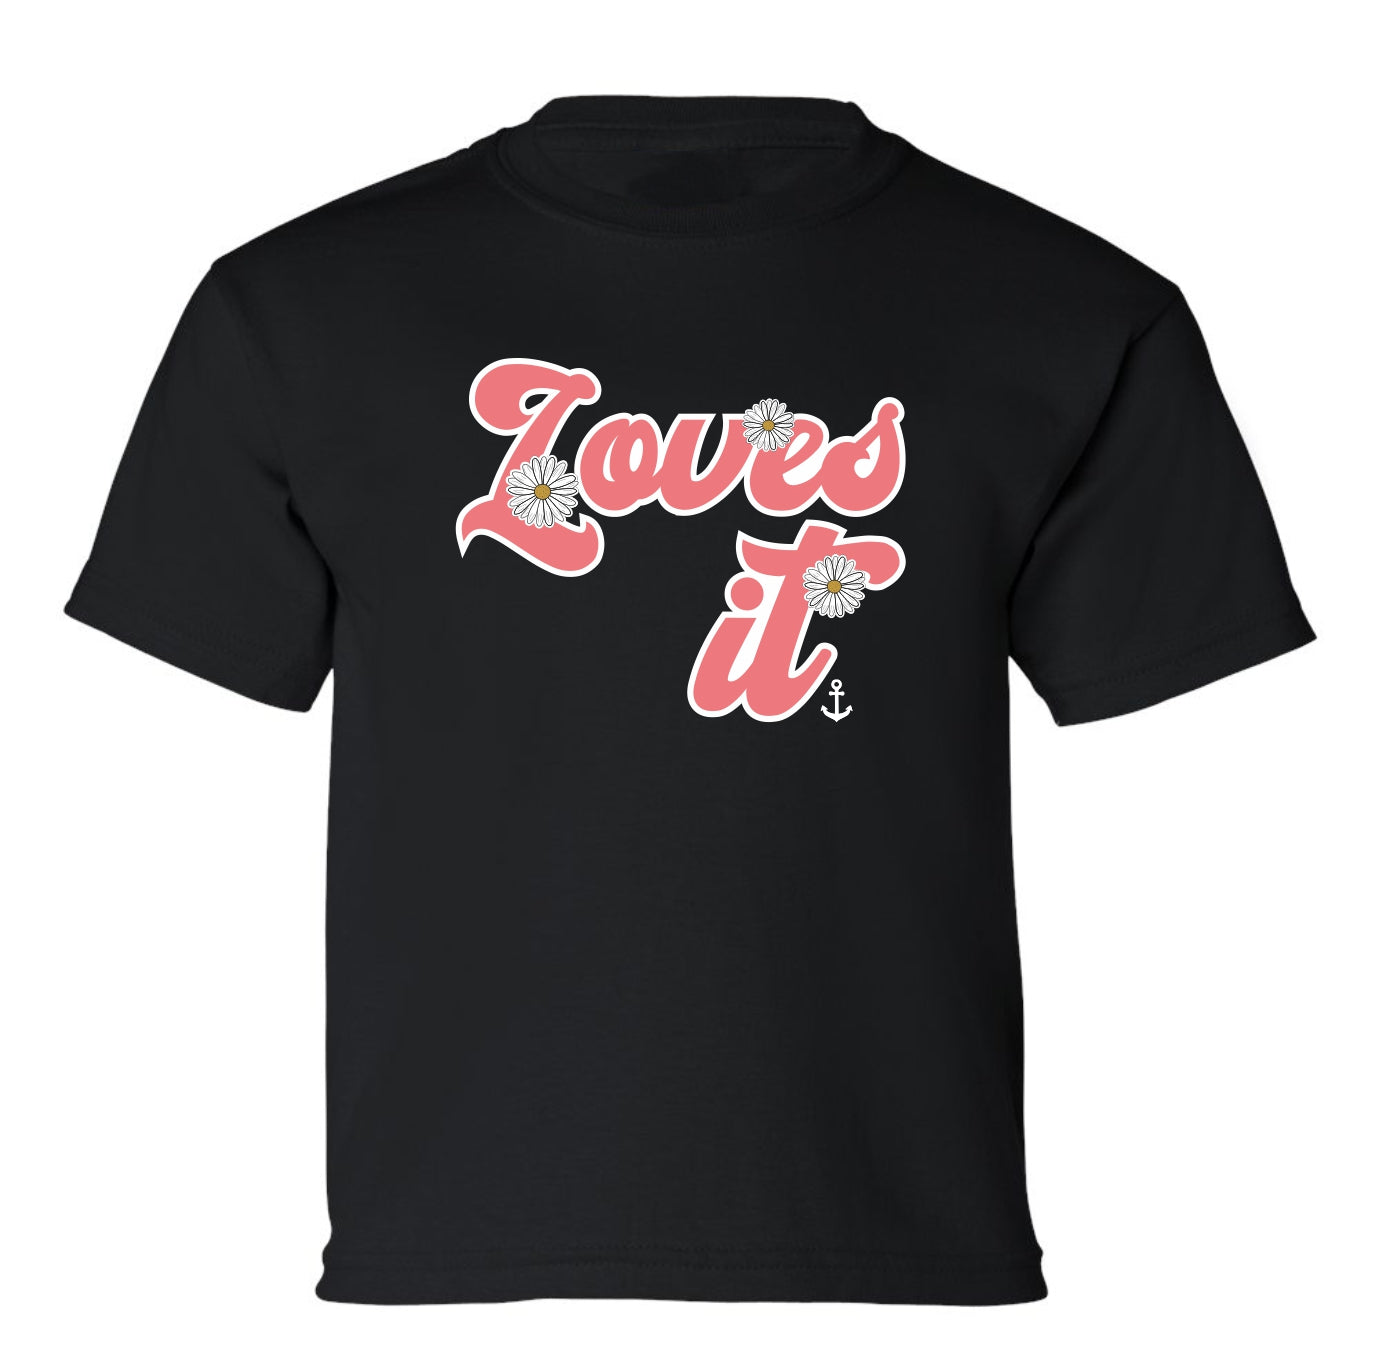 "Loves It" Daisies Toddler/Youth T-Shirt